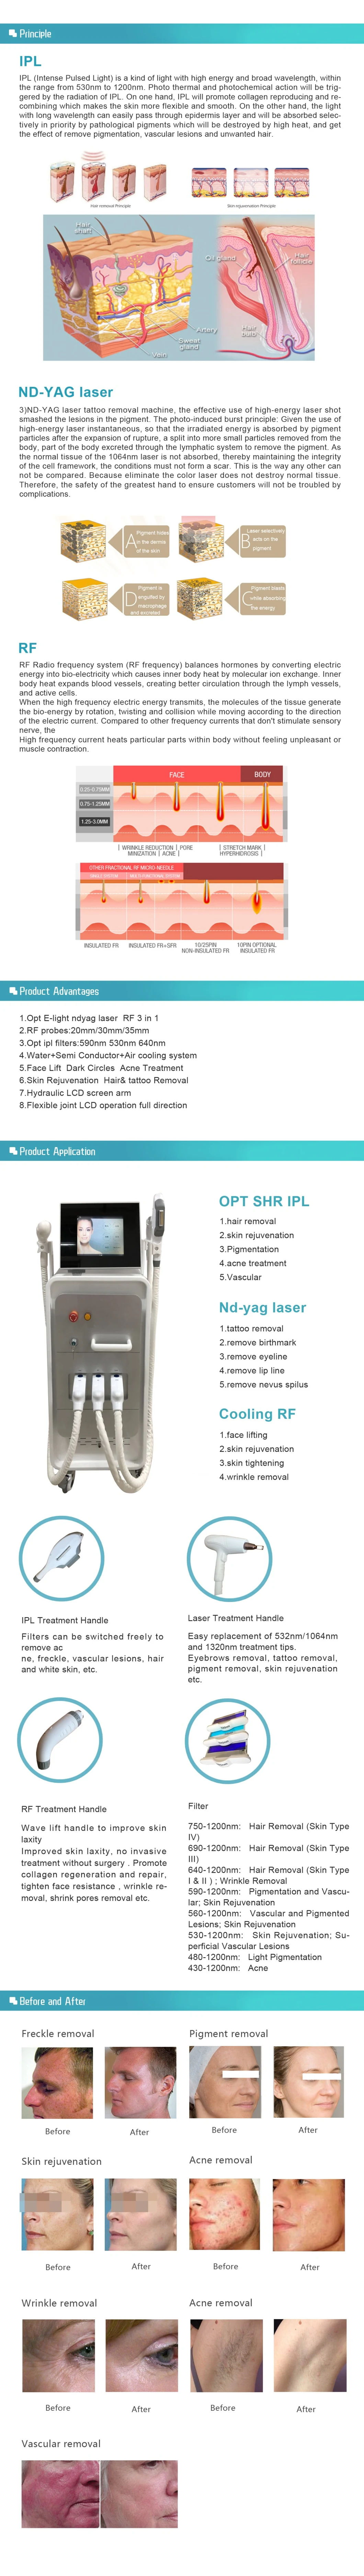 Multi-Function IPL/Opt + ND YAG Laser + RF, 3 in 1 Beauty Instrument